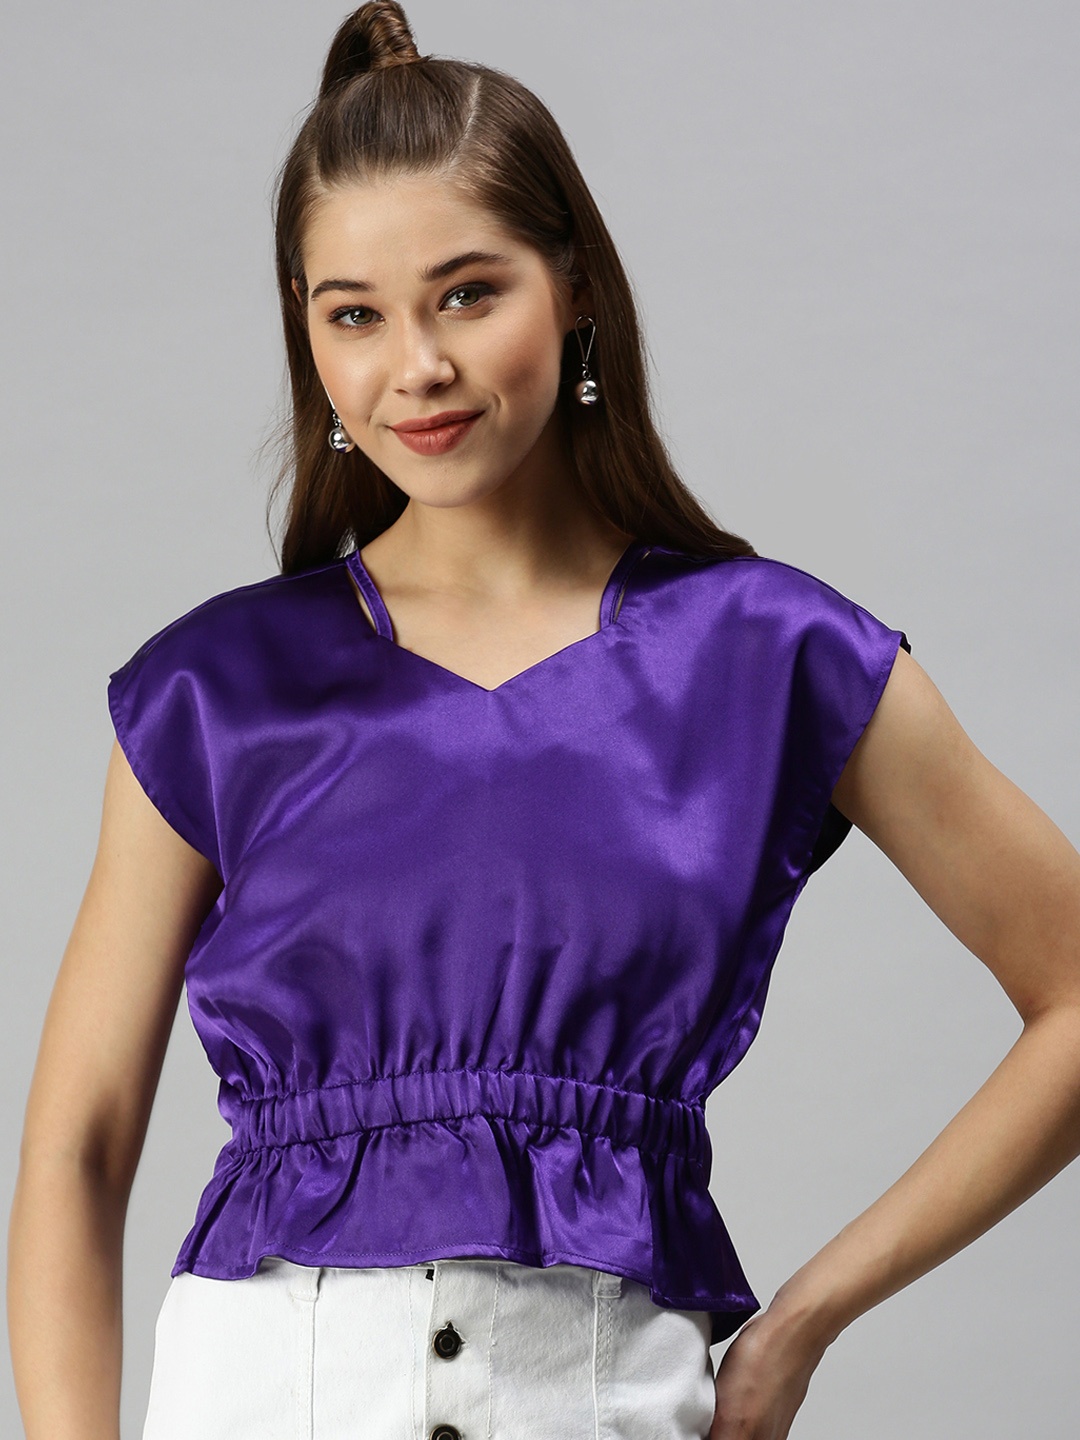 

SHOWOFF Women Violet Sweetheart Neck Extended Sleeves Cinched Waist Top